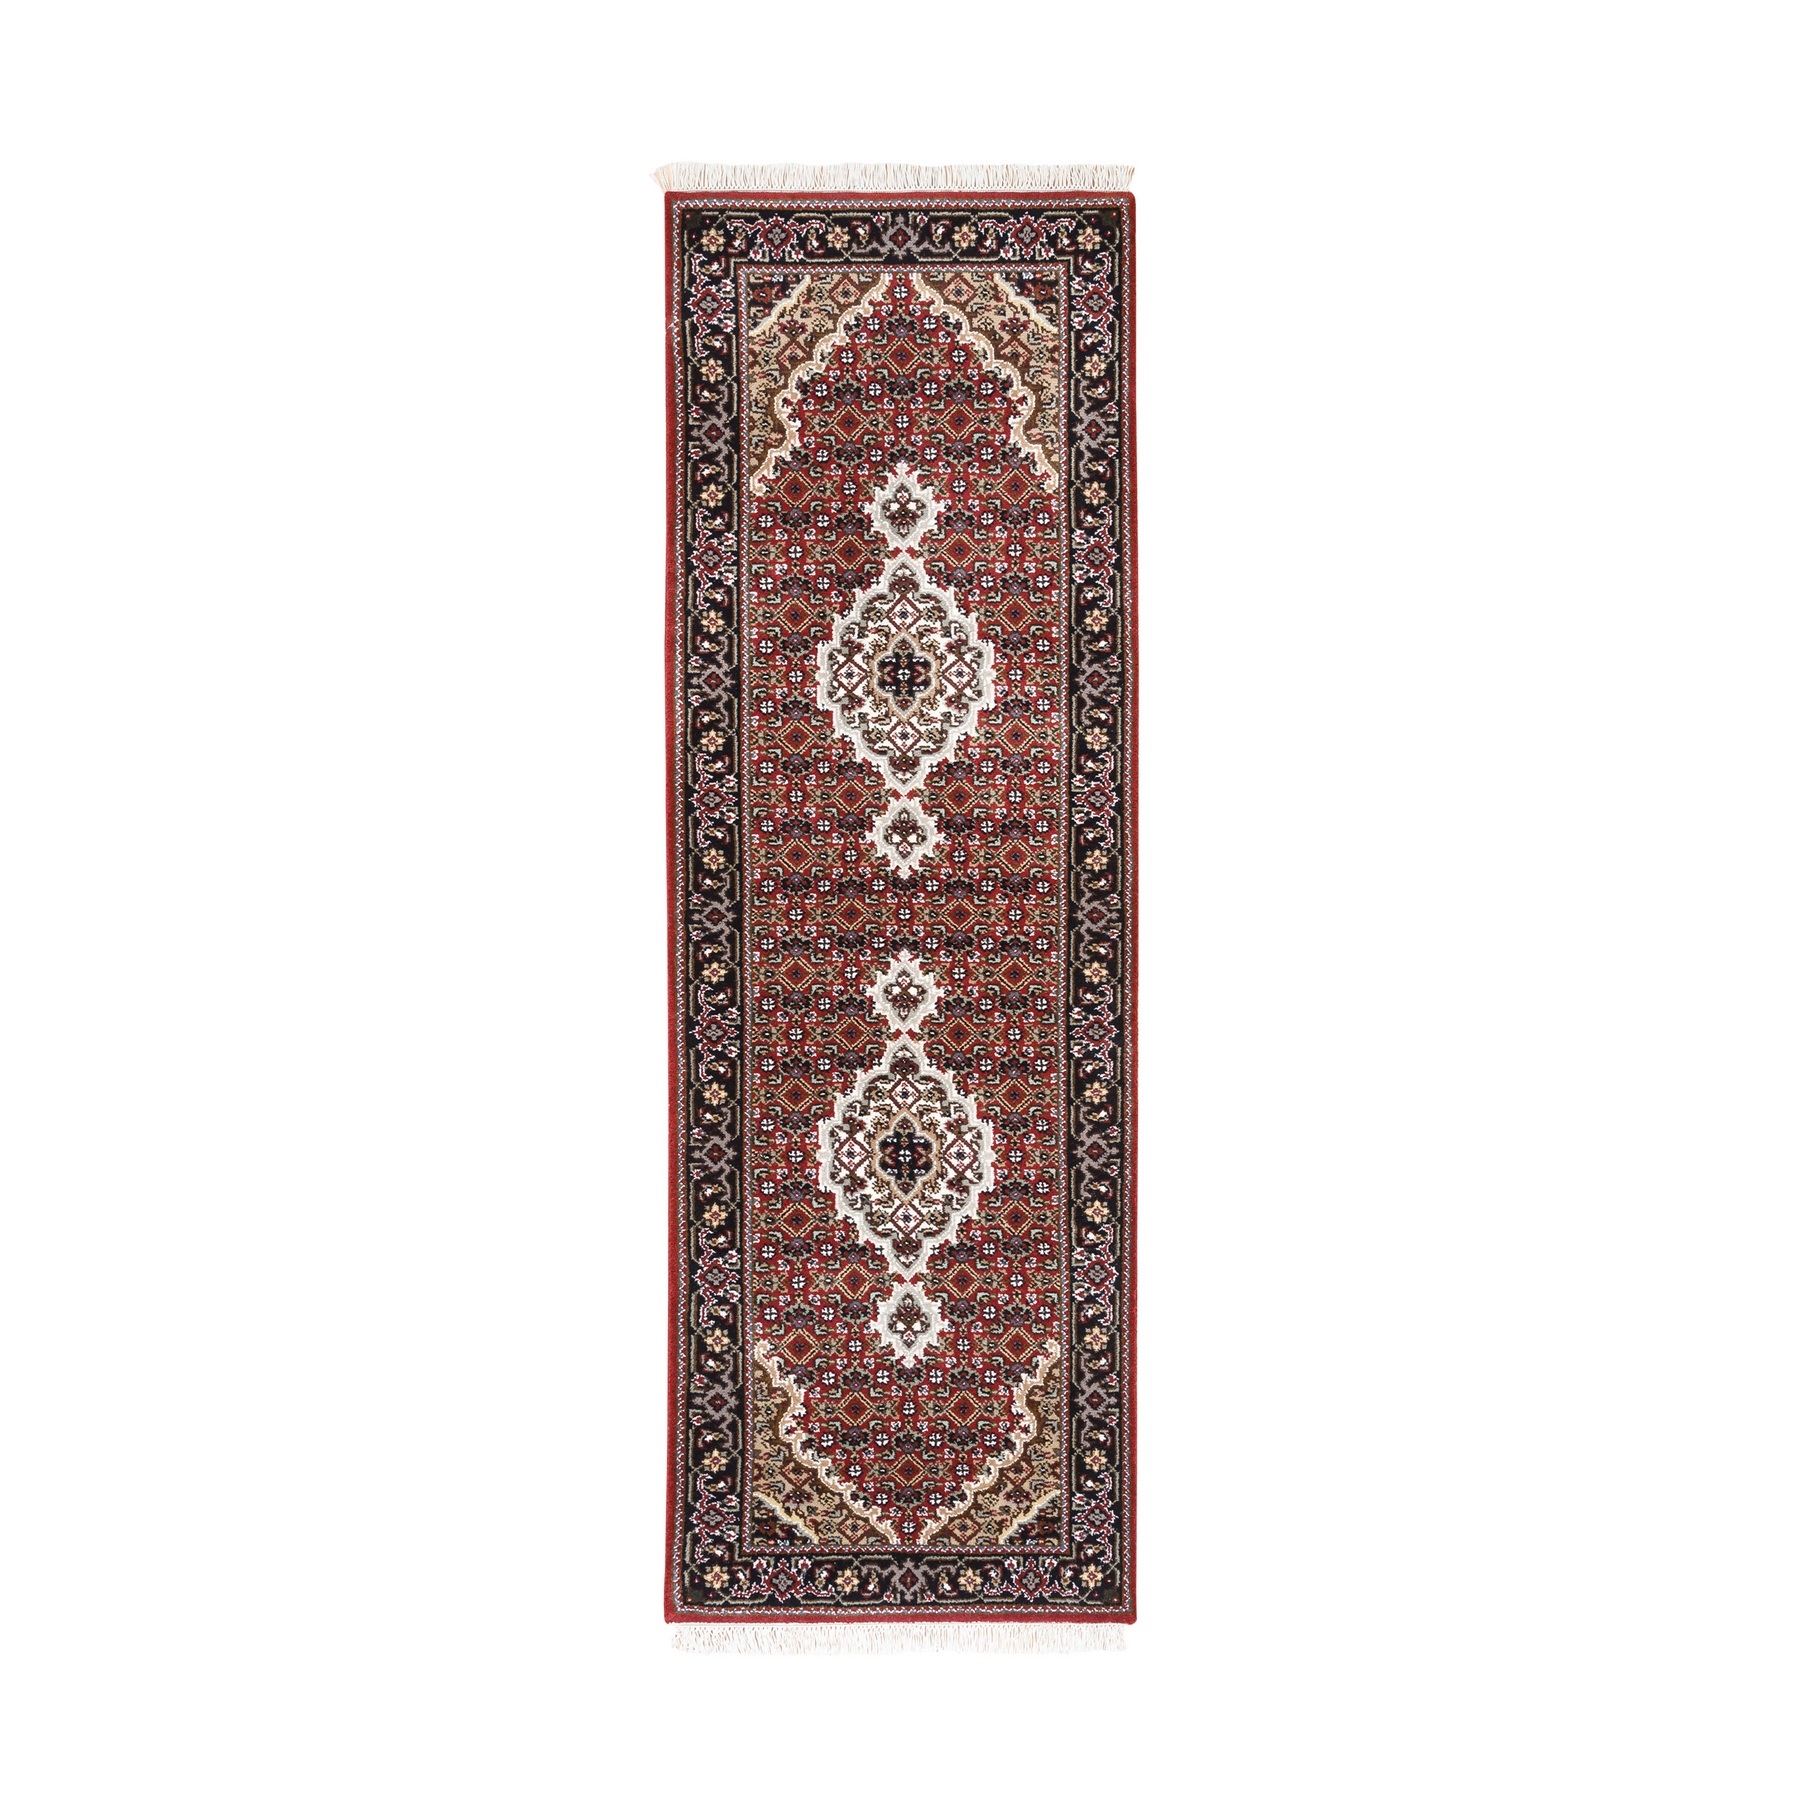 Pirniakan Collection Hand Knotted Red Rug No: 1124930